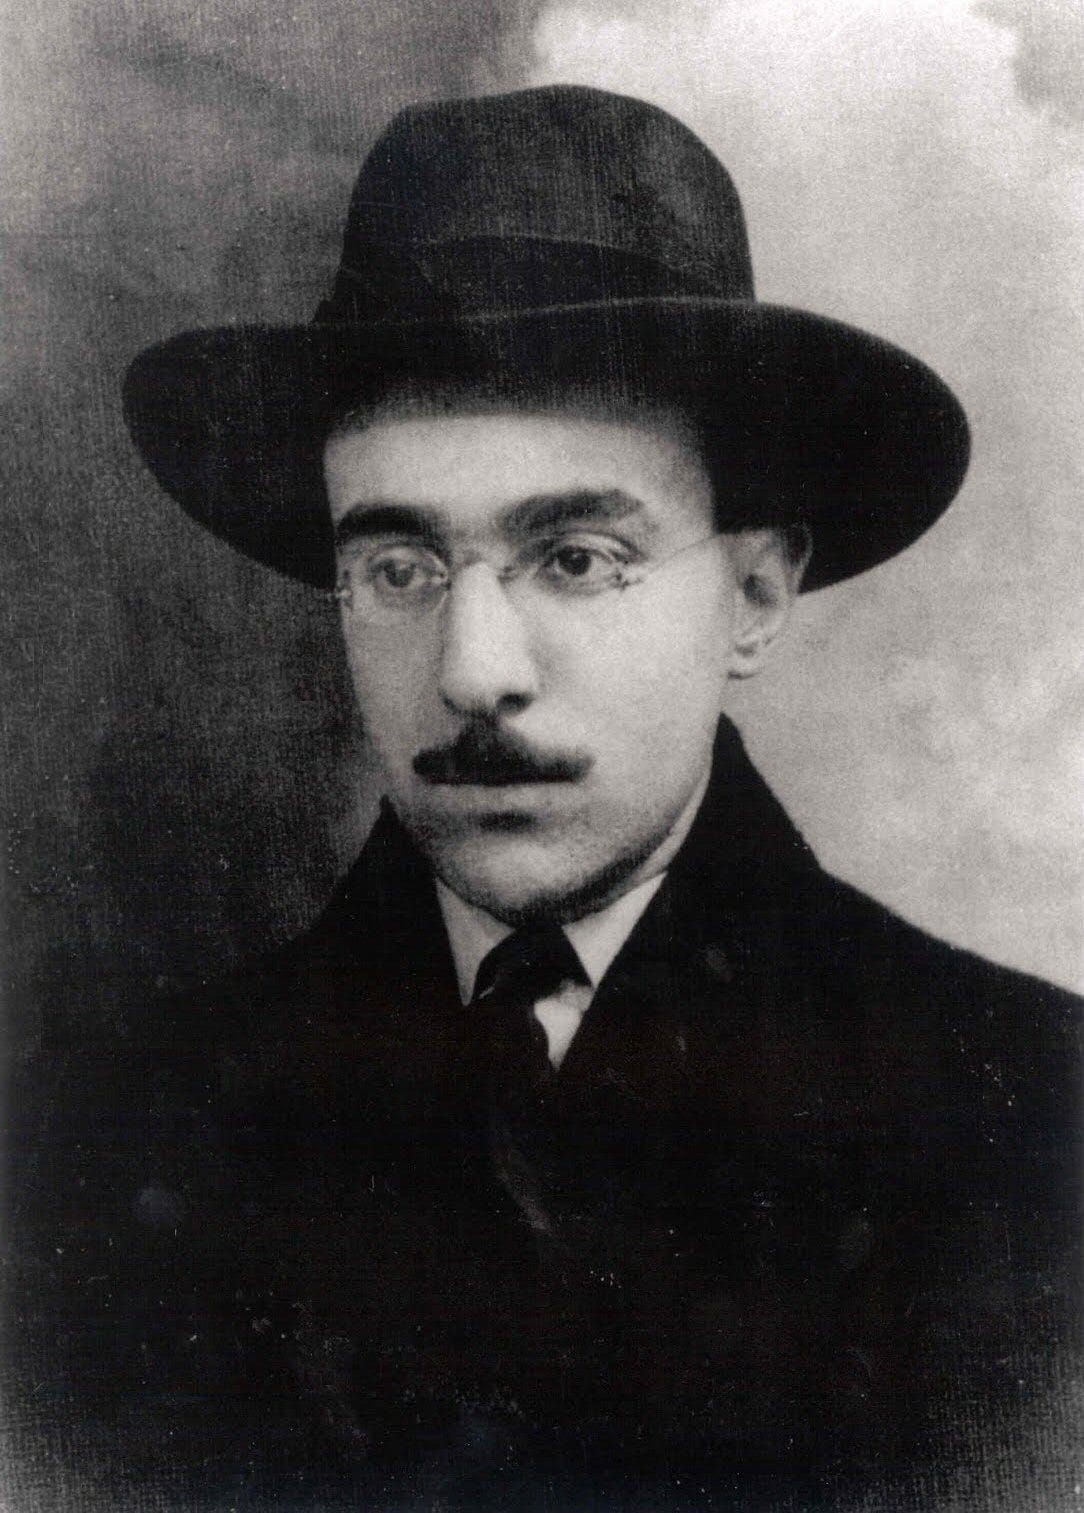 A black and white photograph of the poet and writer Fernando Pessoa.